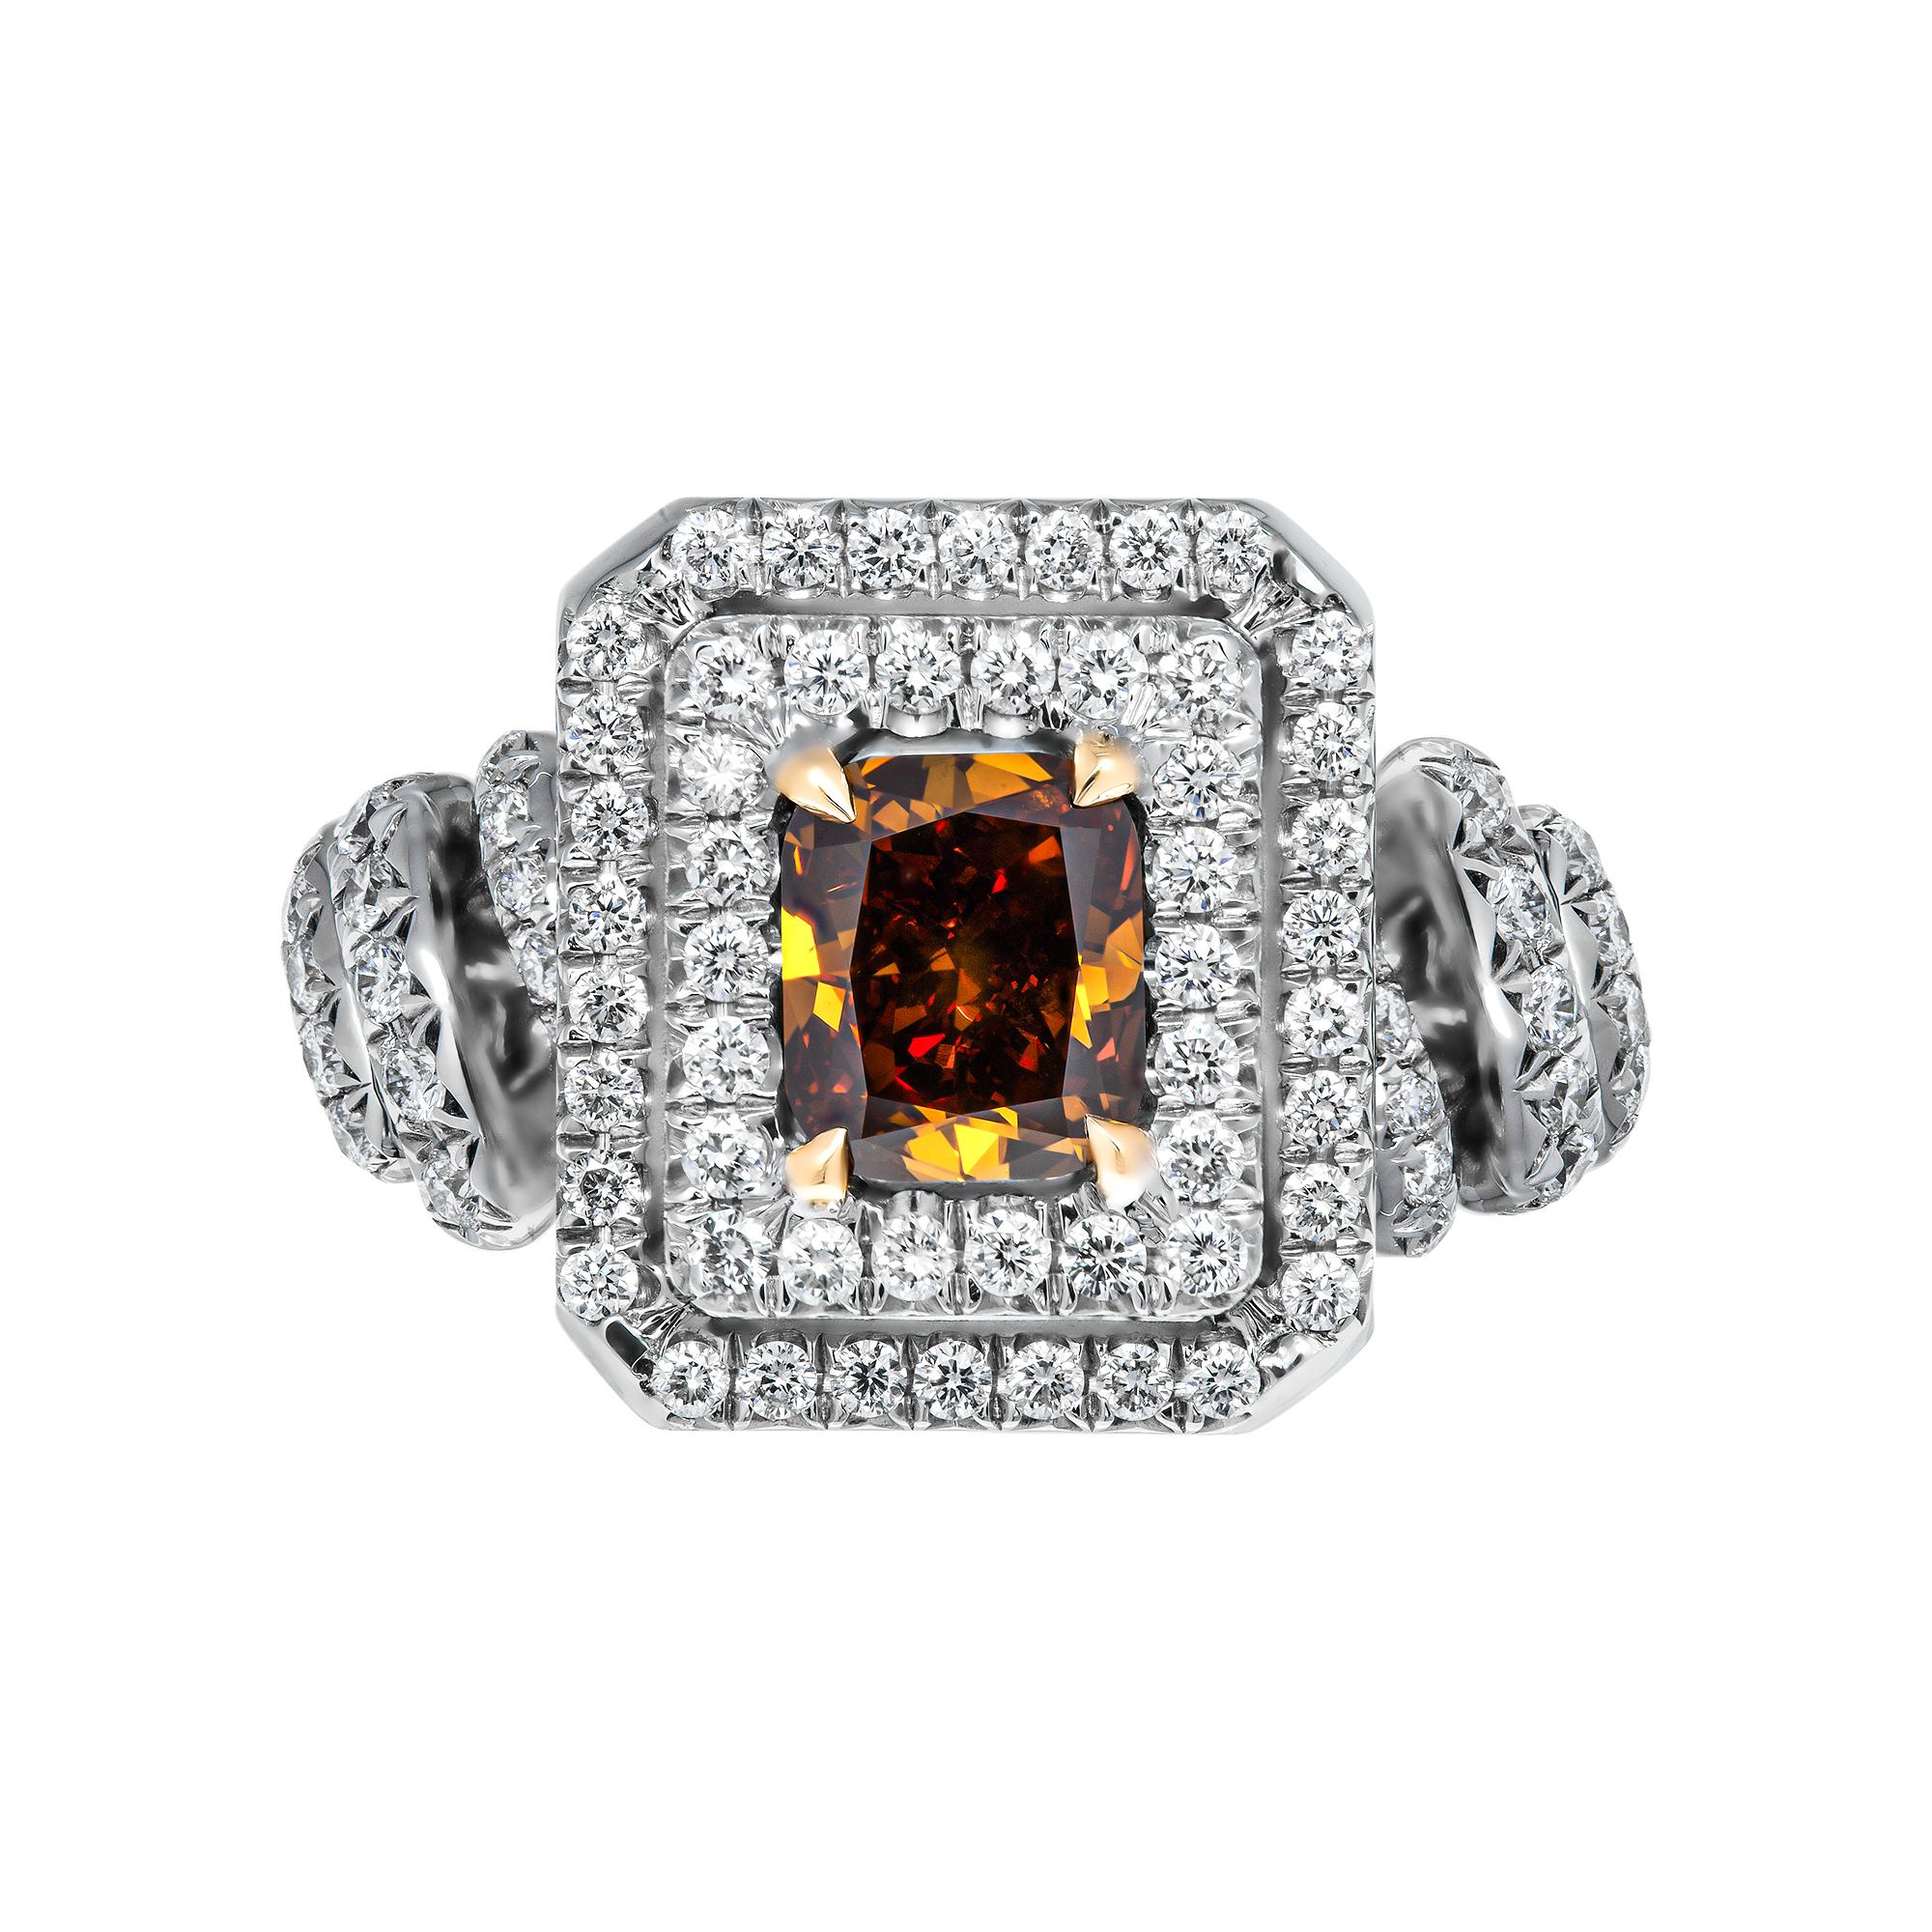 GIA Certified Cocktail Ring with 1.01ct Fancy Deep Orange-Brown Diamond 

Mounted in handmade custom design setting featuring Platinum 950 & 18K Yellow Gold prongs, 1 row of full brilliant cut diamonds that swirls around on the shank and double halo